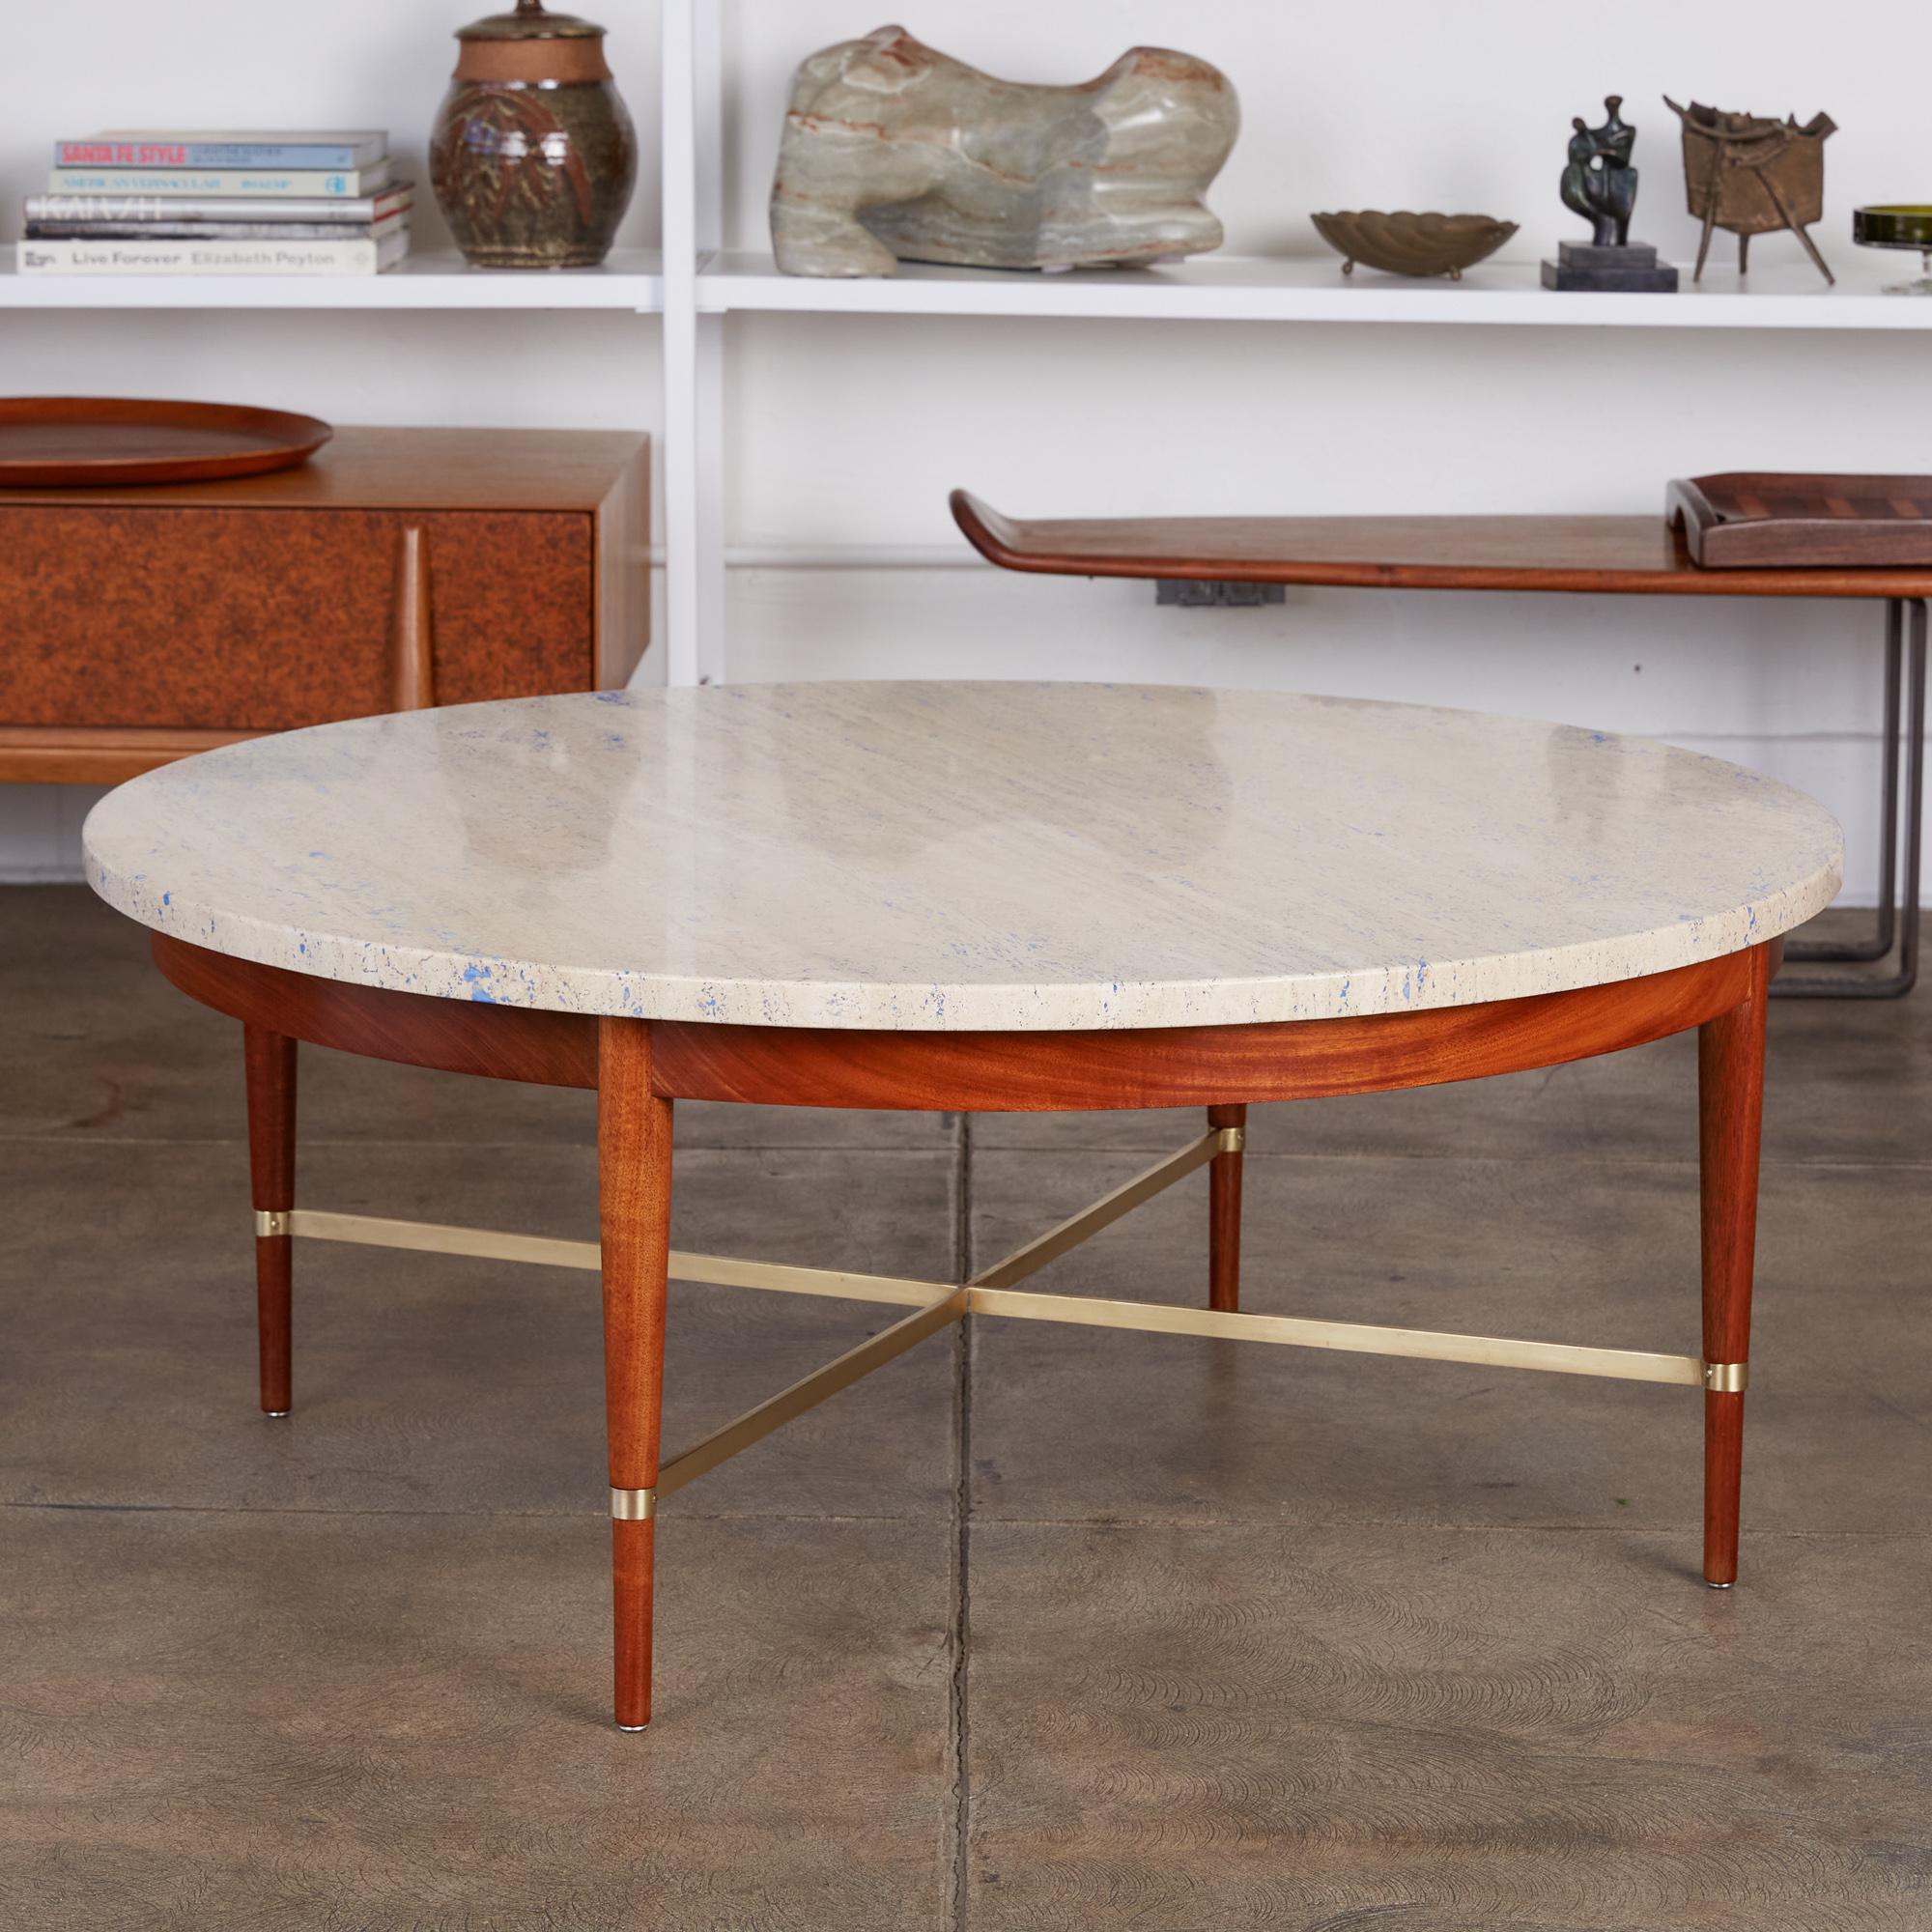 Paul McCobb travertine top coffee table for Calvin Furniture, circa 1950s. This table was part of Calvin’s “Irwin Collection”, which was a higher end line that McCobb designed for them. The line featured many different wood cabinet and table designs